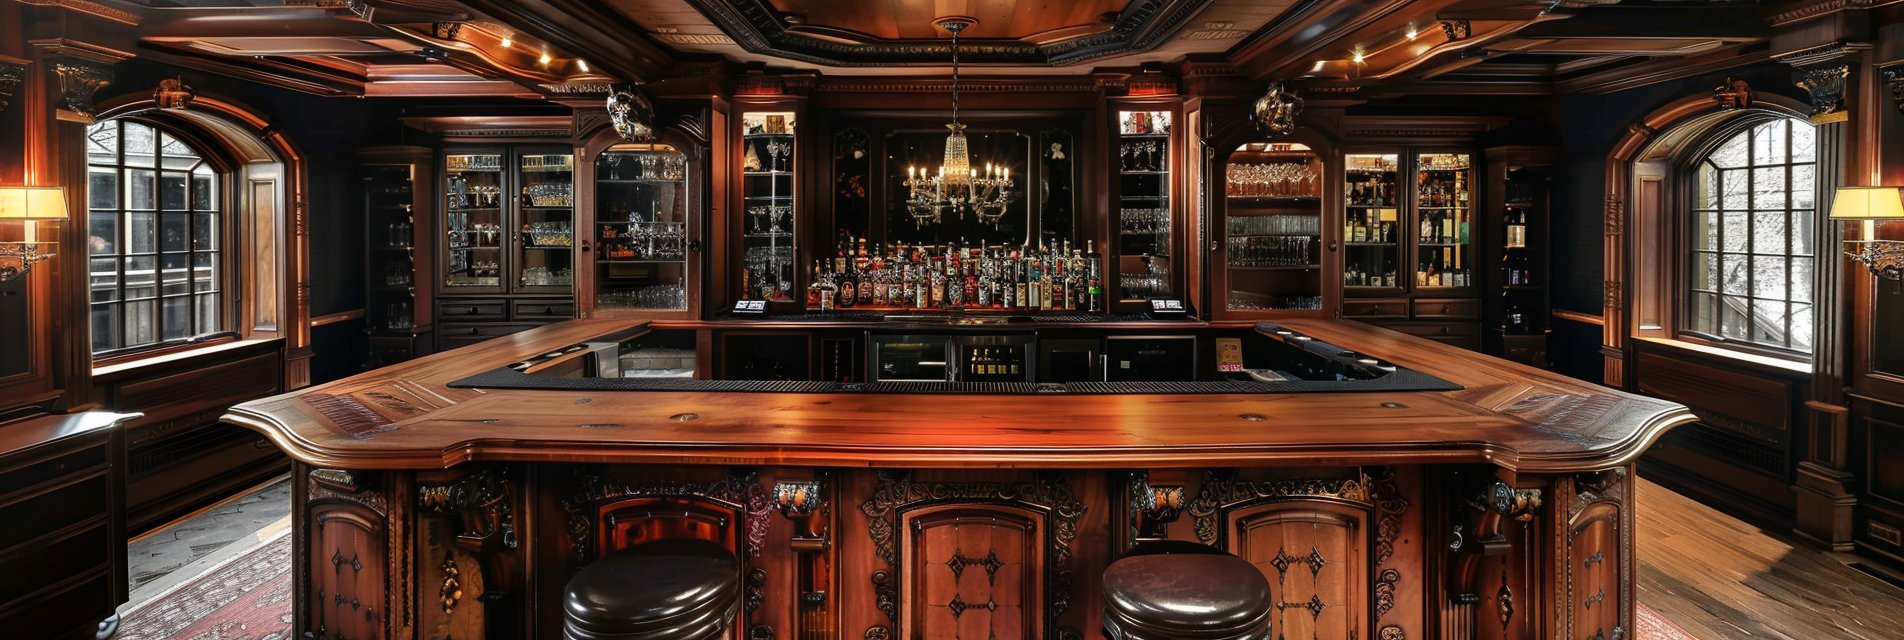 A masterpiece custom CNY bar of cabinetry, mirrors, and shelving